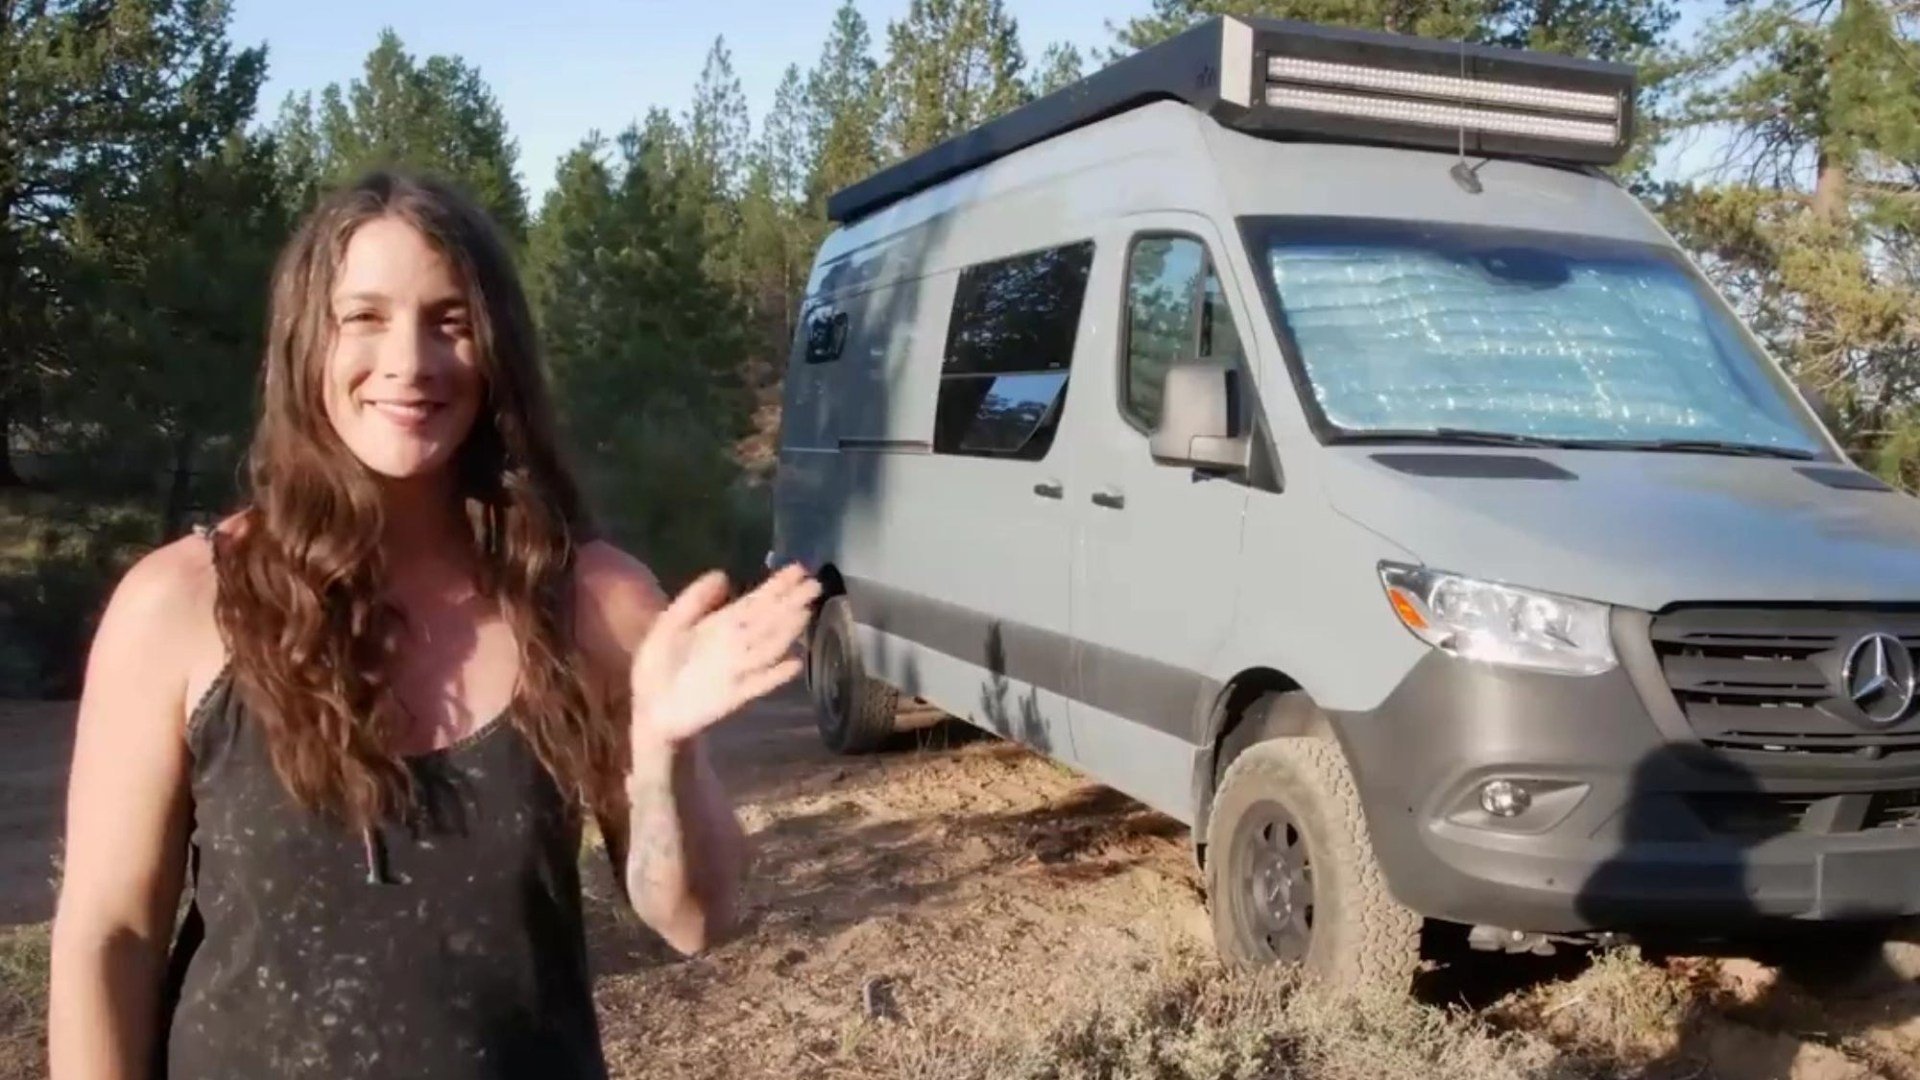 I moved into a van because rent was expensive… people are shocked by the inside